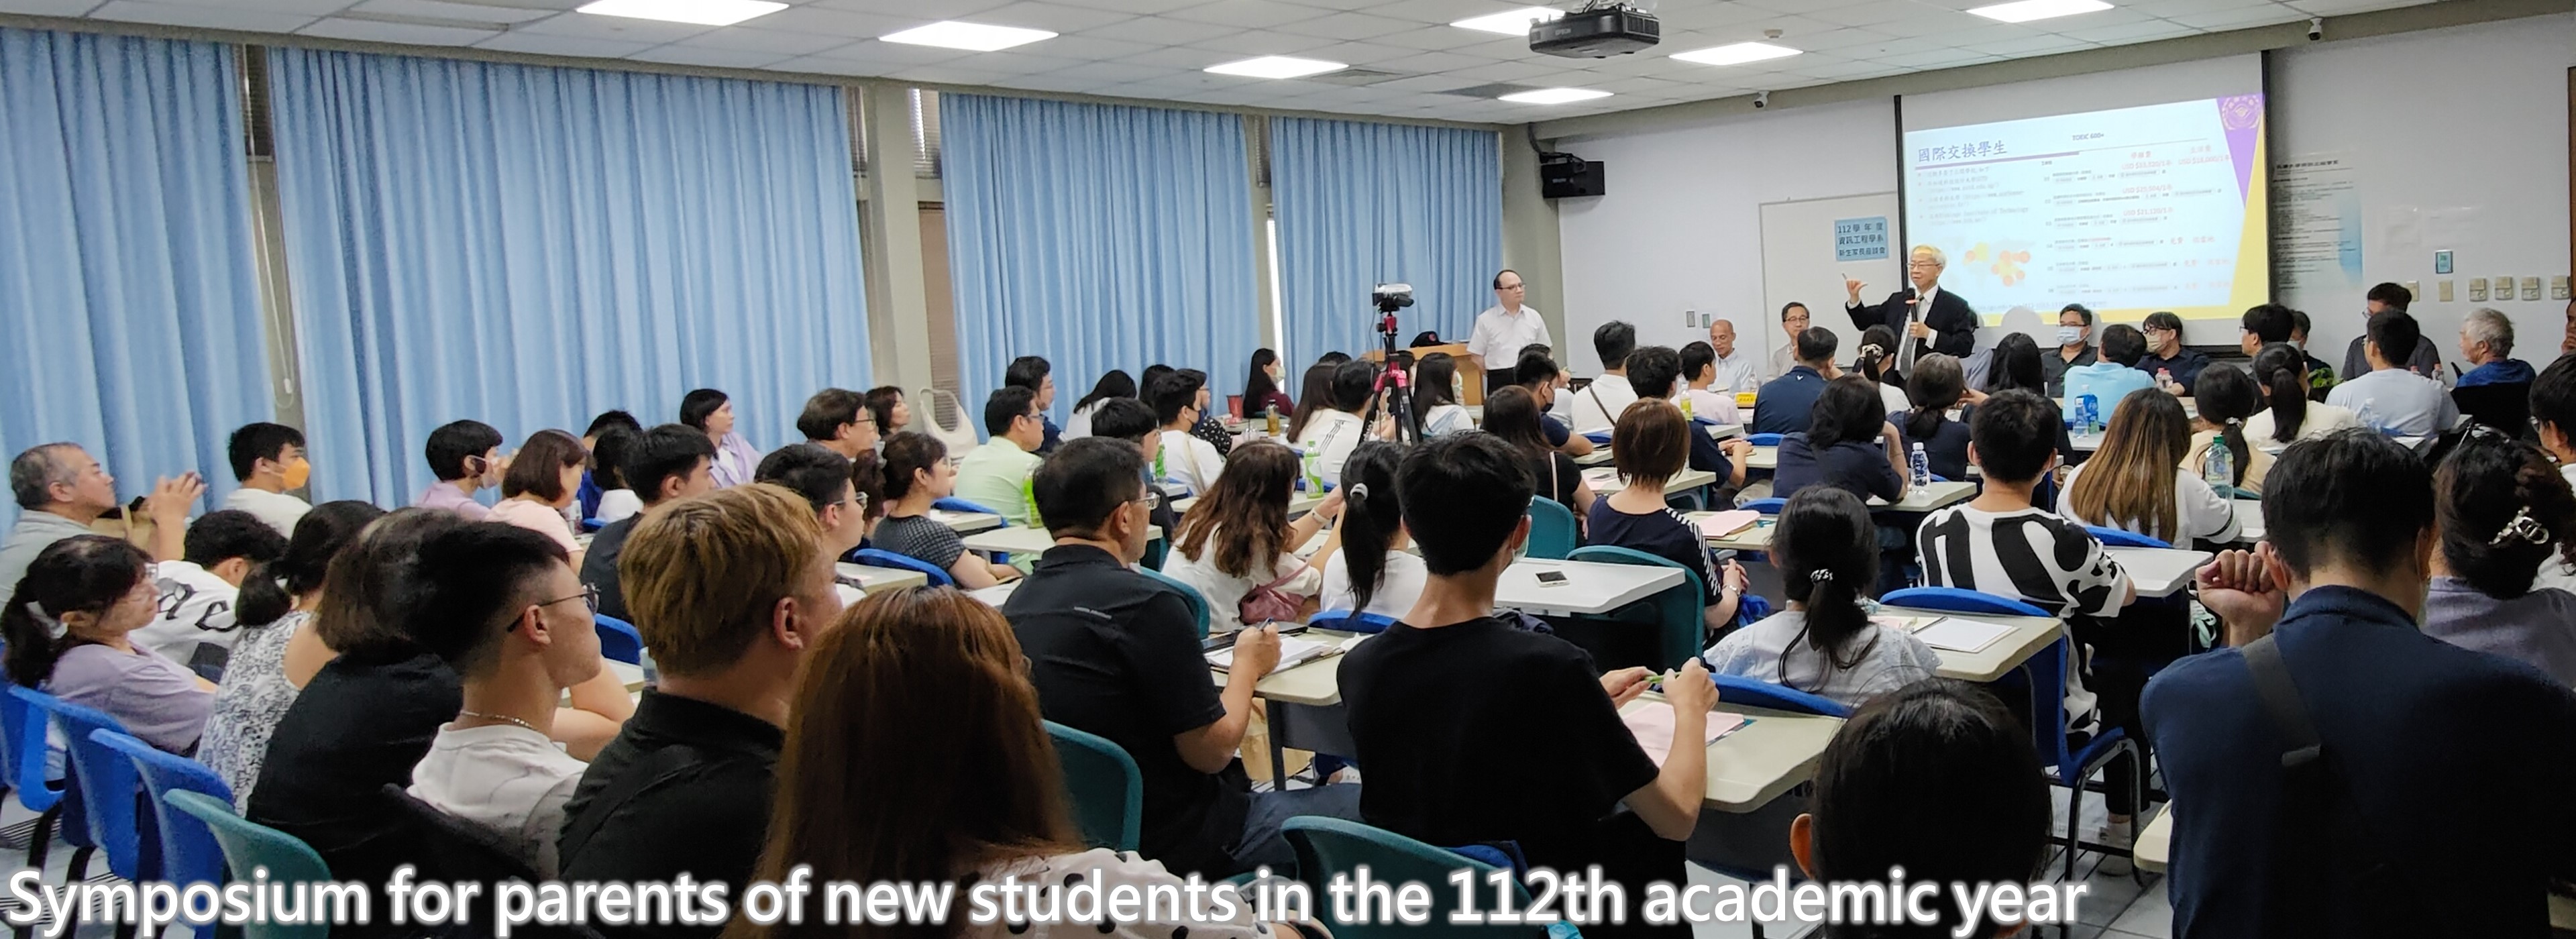 Symposium for parents of new students in the 112th academic year